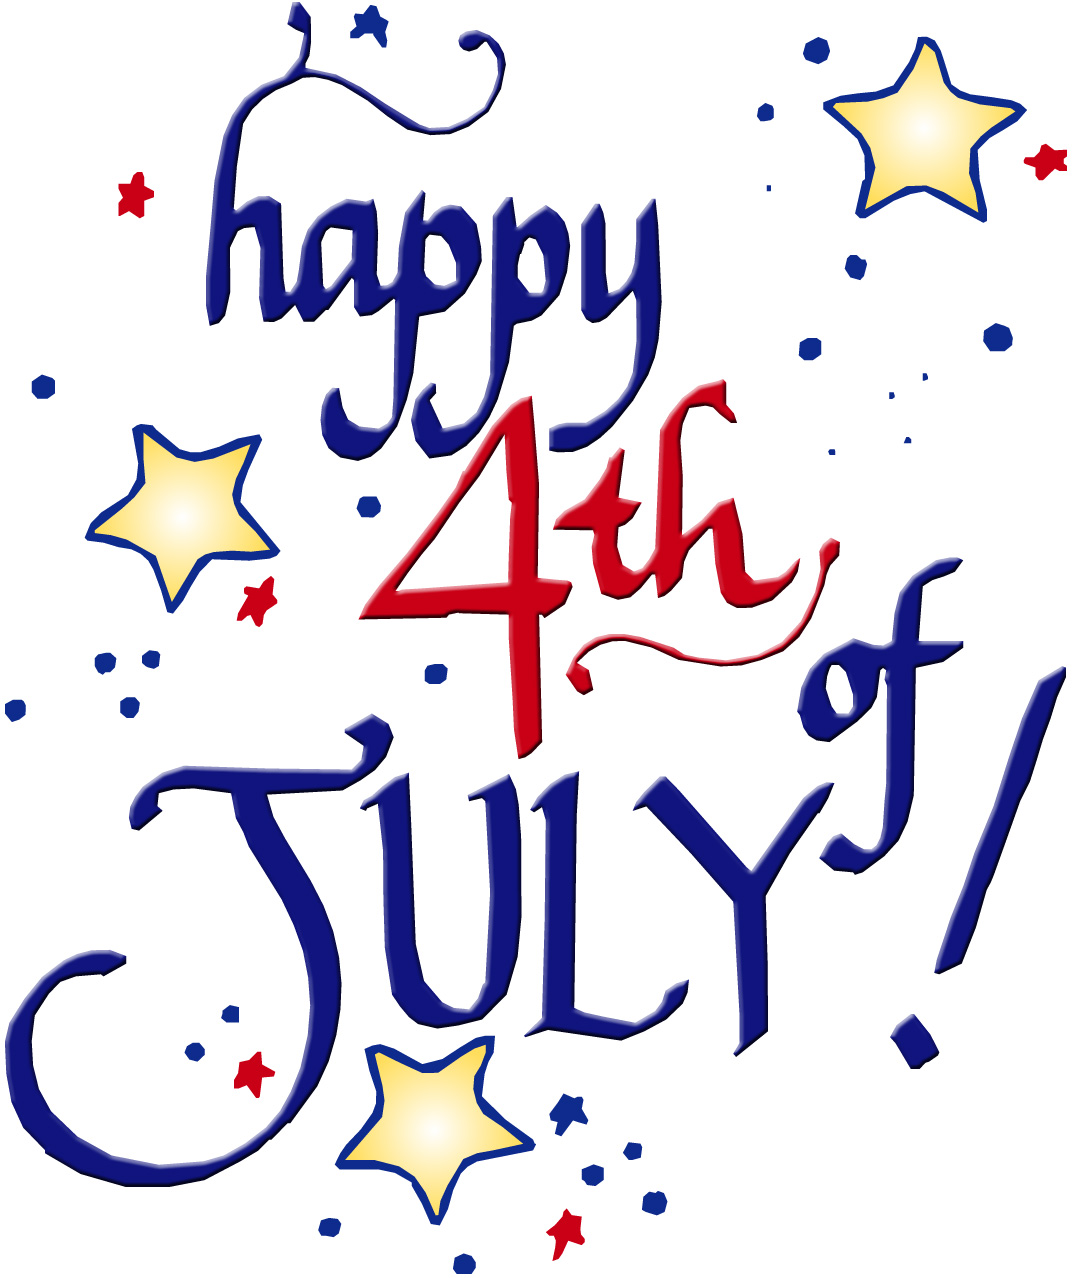 July 4th clipart july4th phot - July 4th Free Clip Art